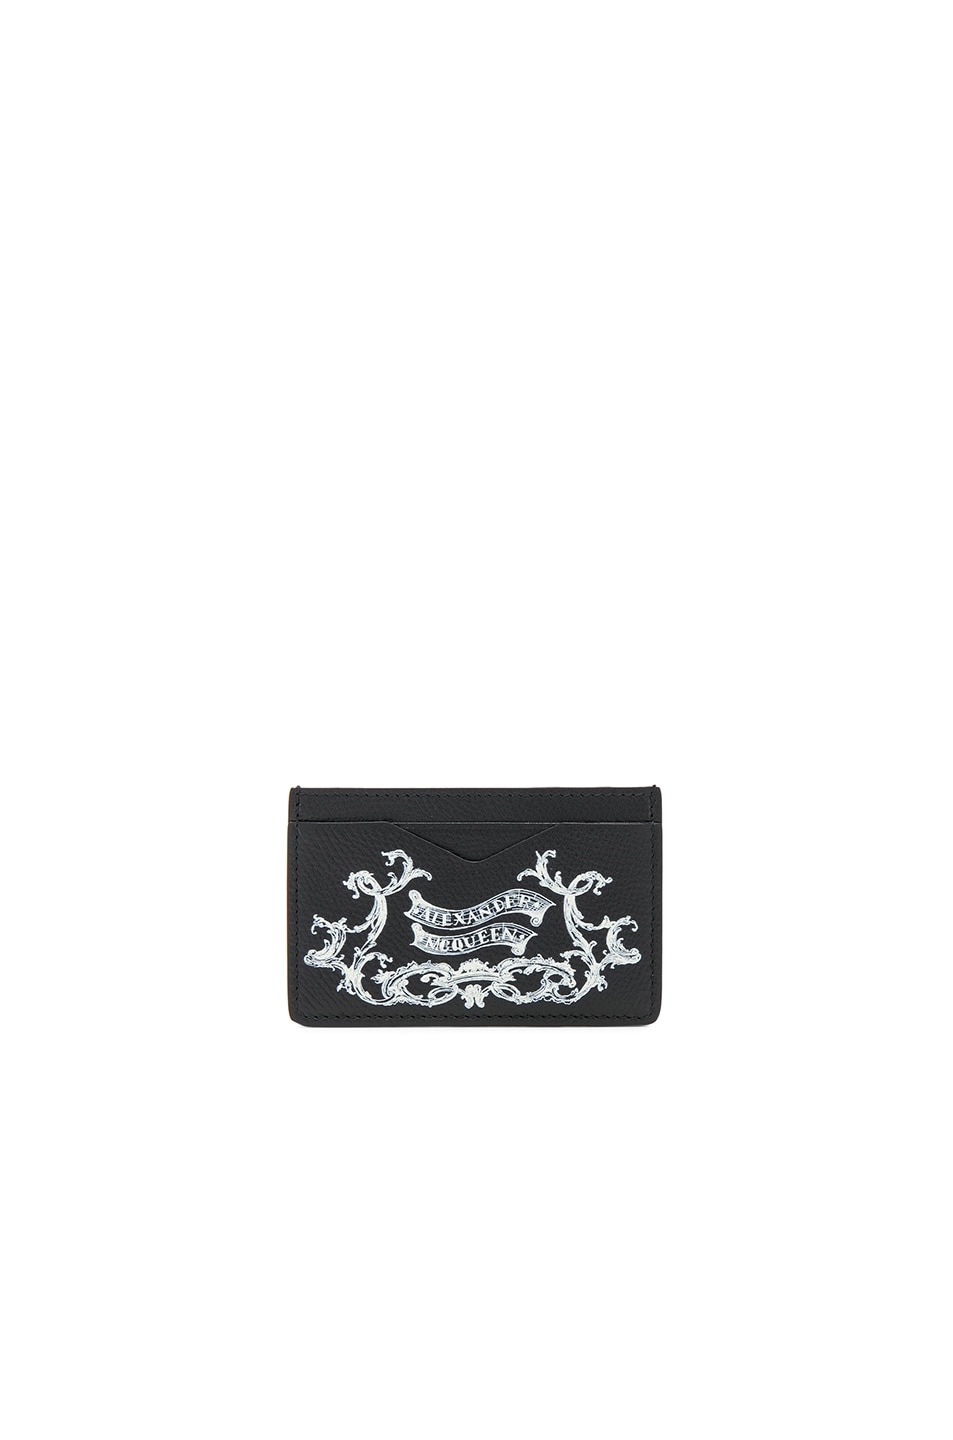 Image 1 of Alexander McQueen Coat of Arms Cardholder in Black & Ivory